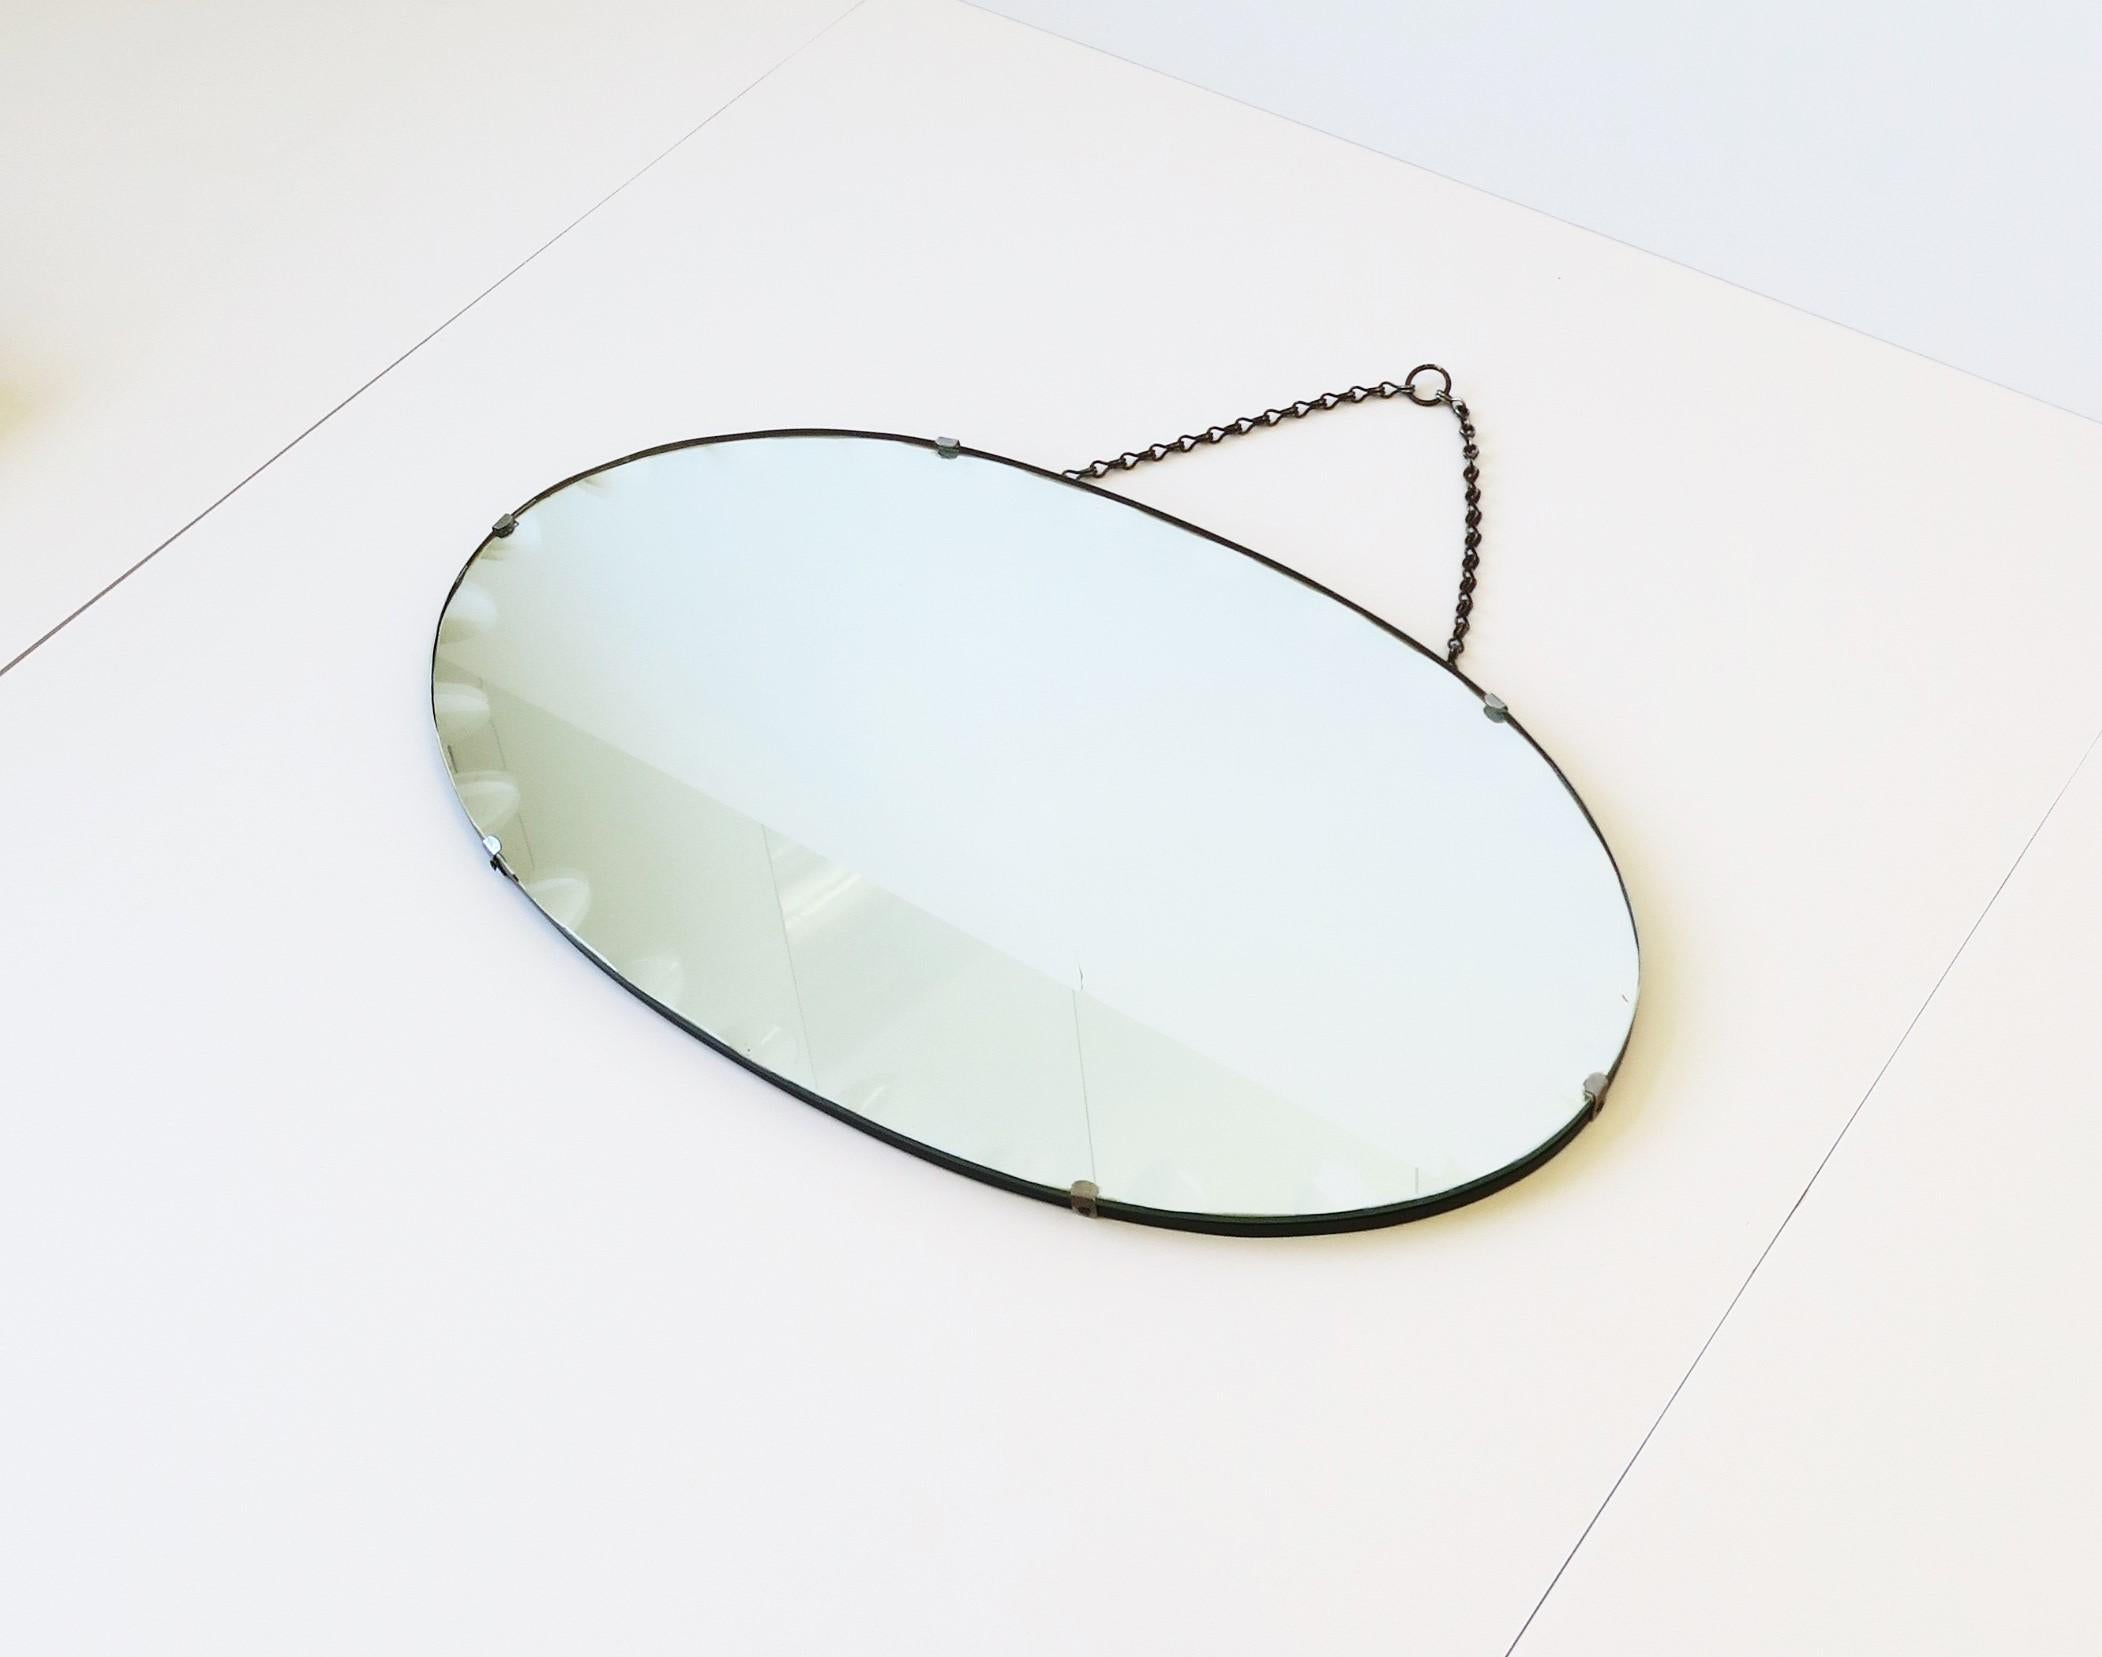 A very beautiful antique wall or vanity mirror with a modern bevel design around, circa early 20th century. Piece is oval in shape featuring this modern bevel; A design I haven't seen before. This bevel design can be seen best in images 3, 5, and 7.